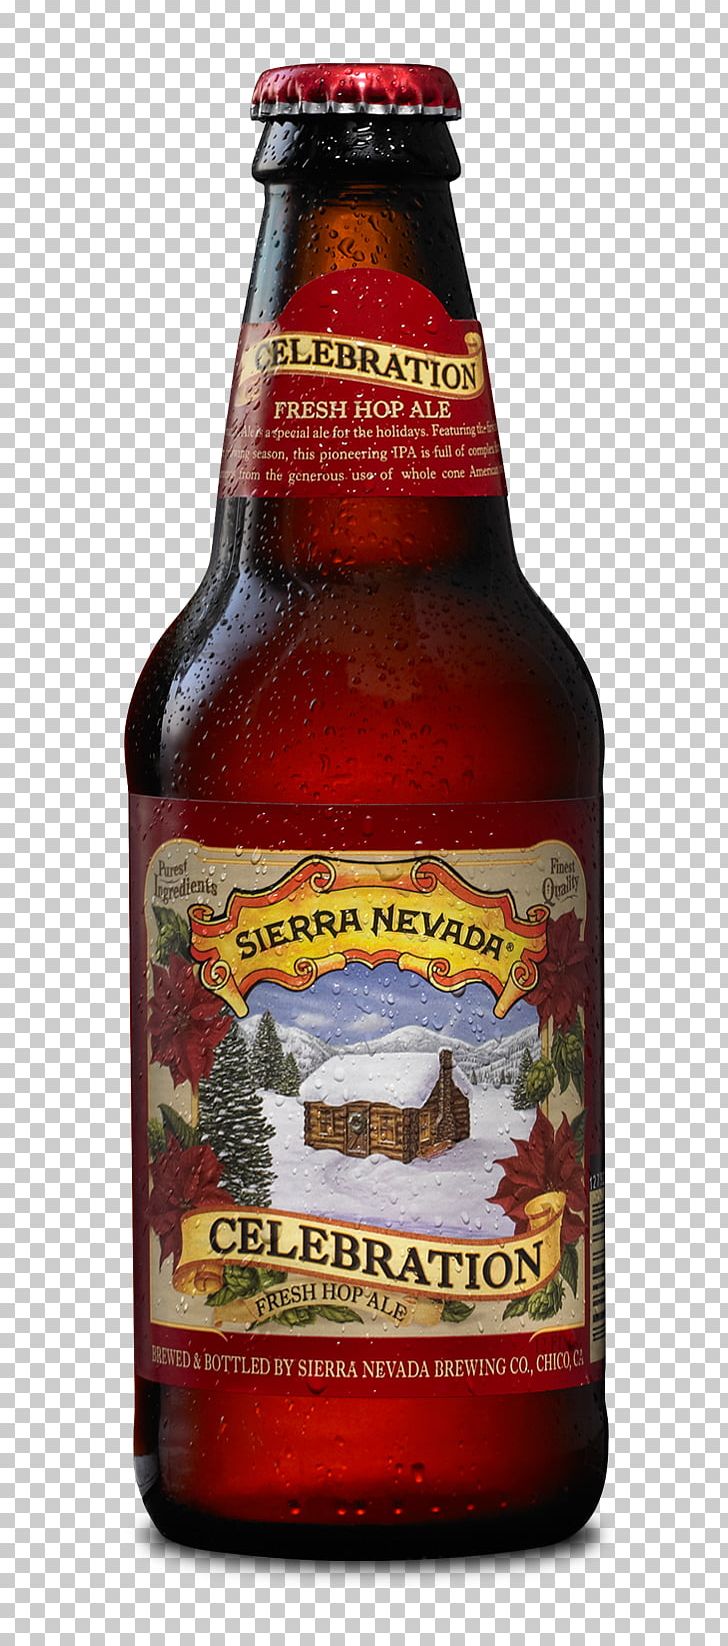 India Pale Ale Beer Sierra Nevada Brewing Company PNG, Clipart, Alcoholic Beverage, Ale, Beer, Beer Bottle, Beer Brewing Grains Malts Free PNG Download